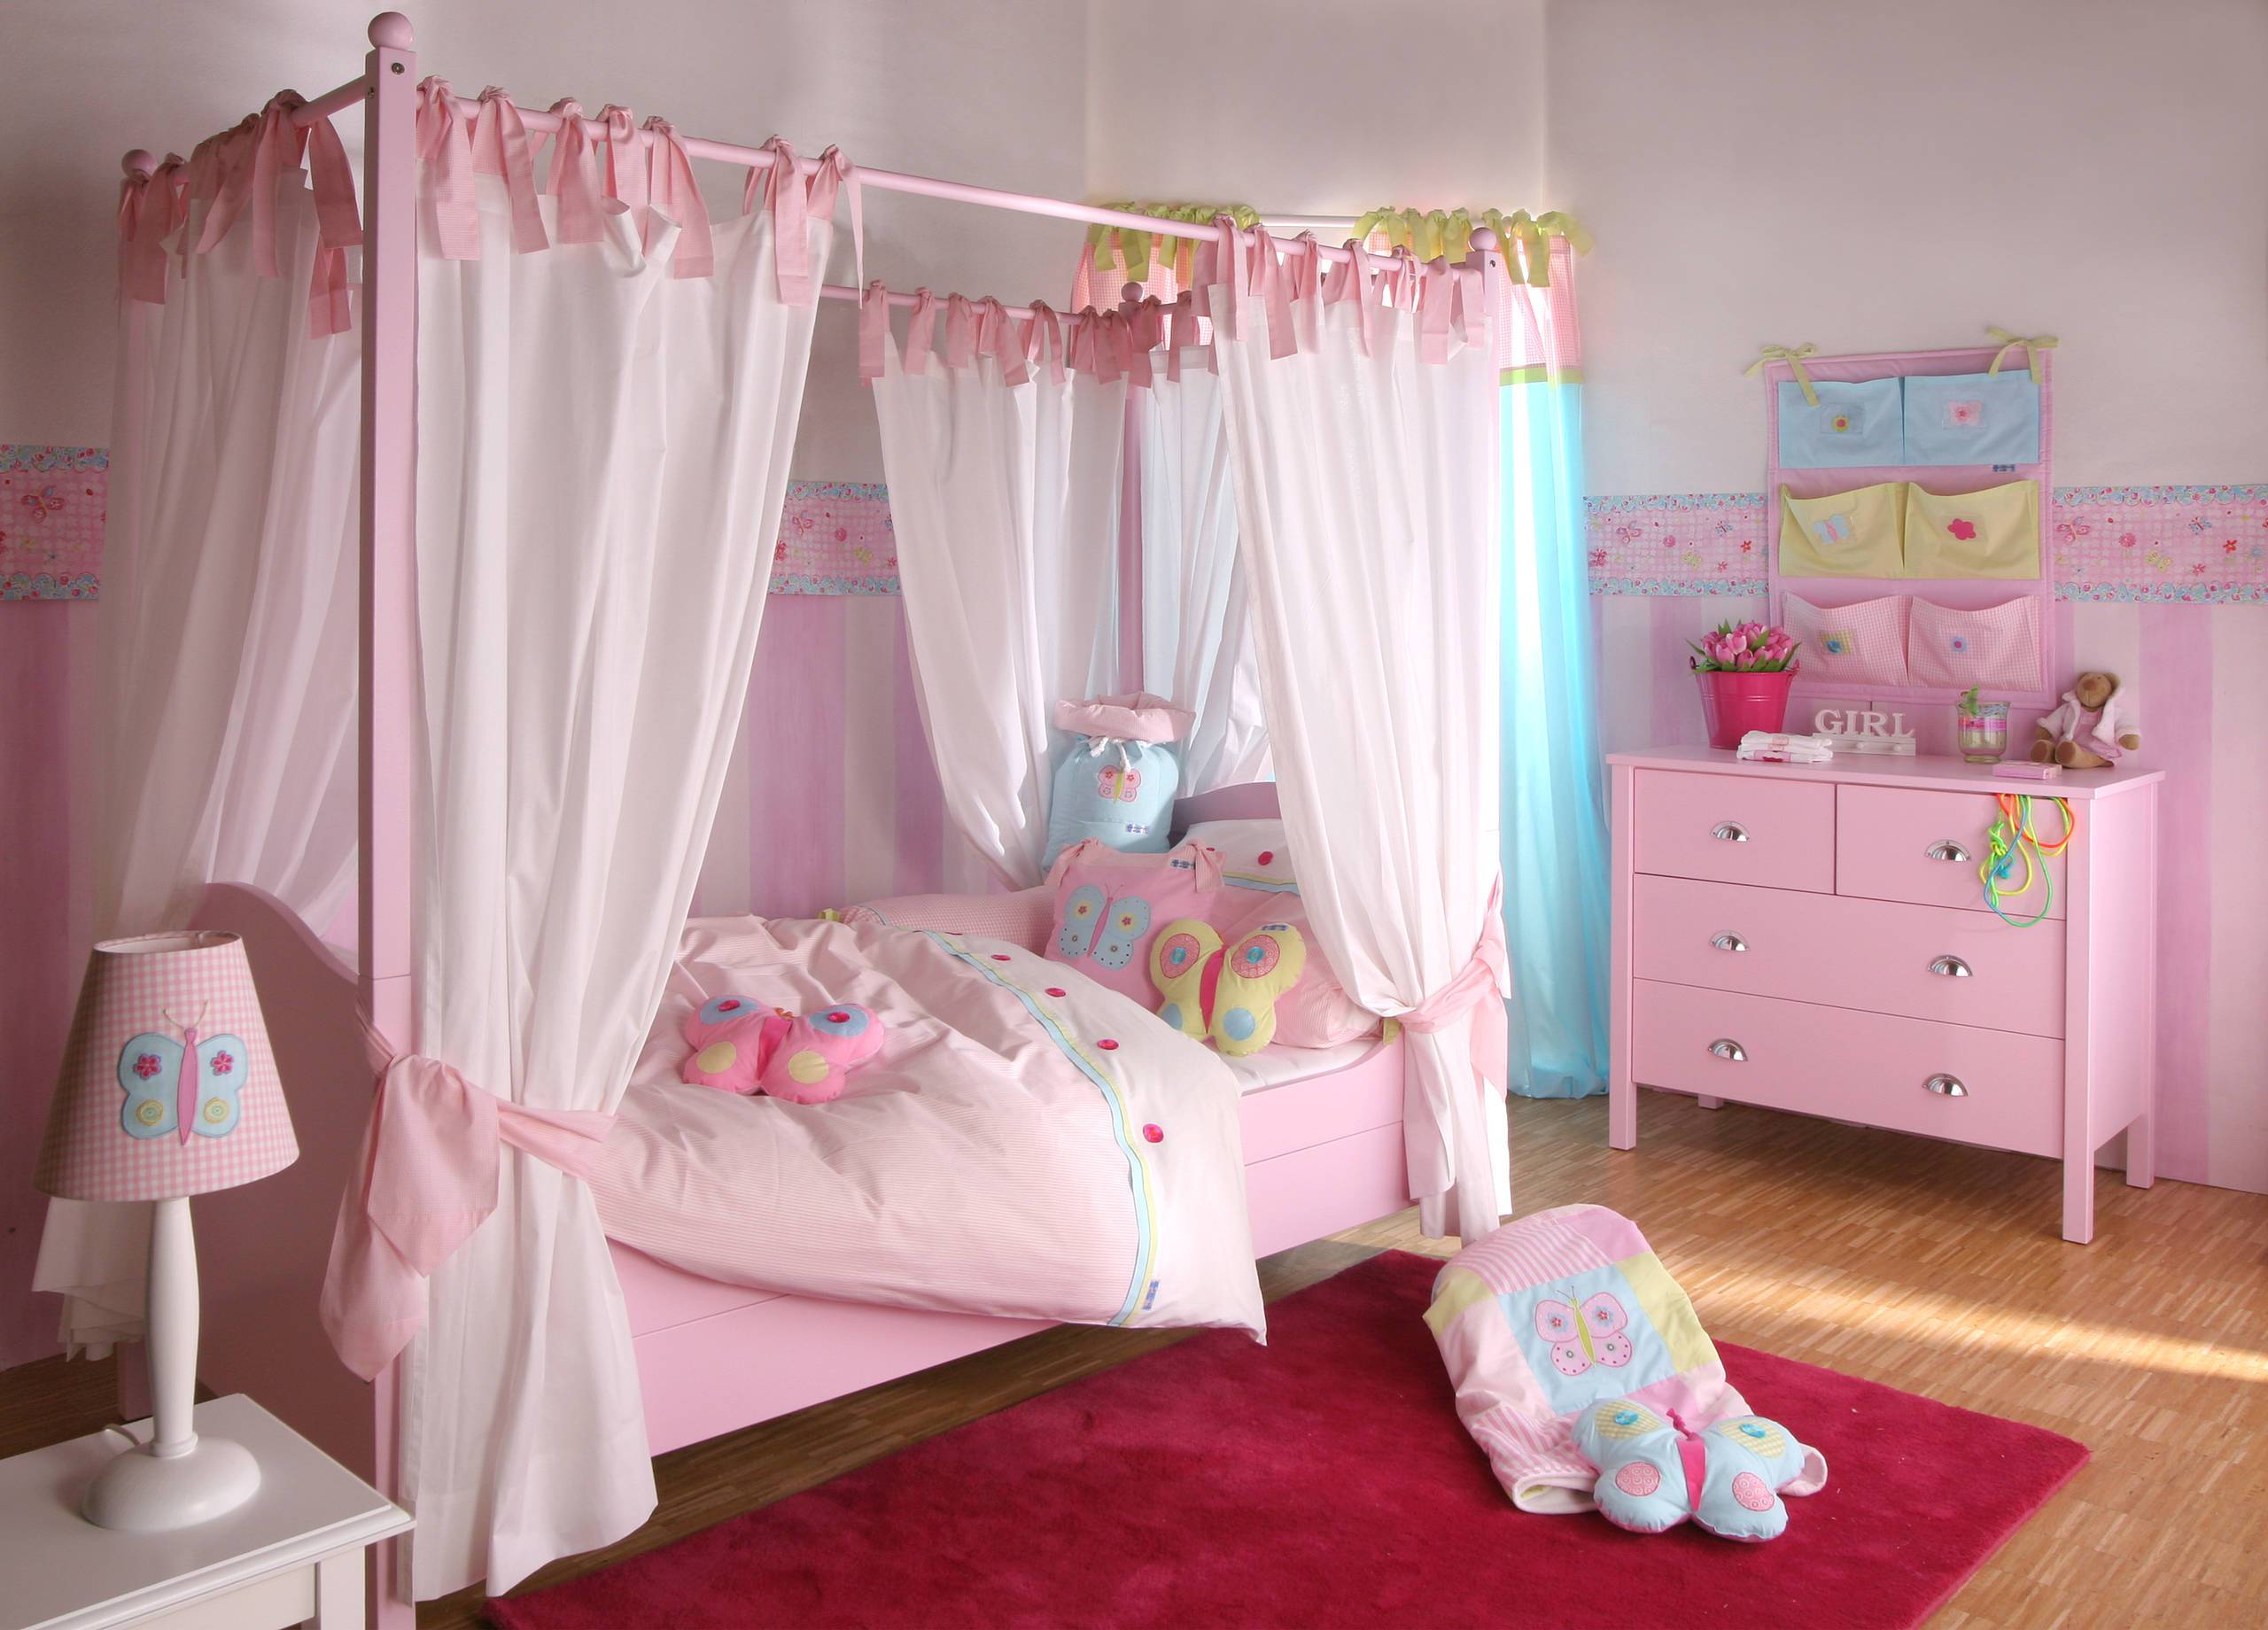 Pretty In Pink And Purple: Princess Bedroom Ideas